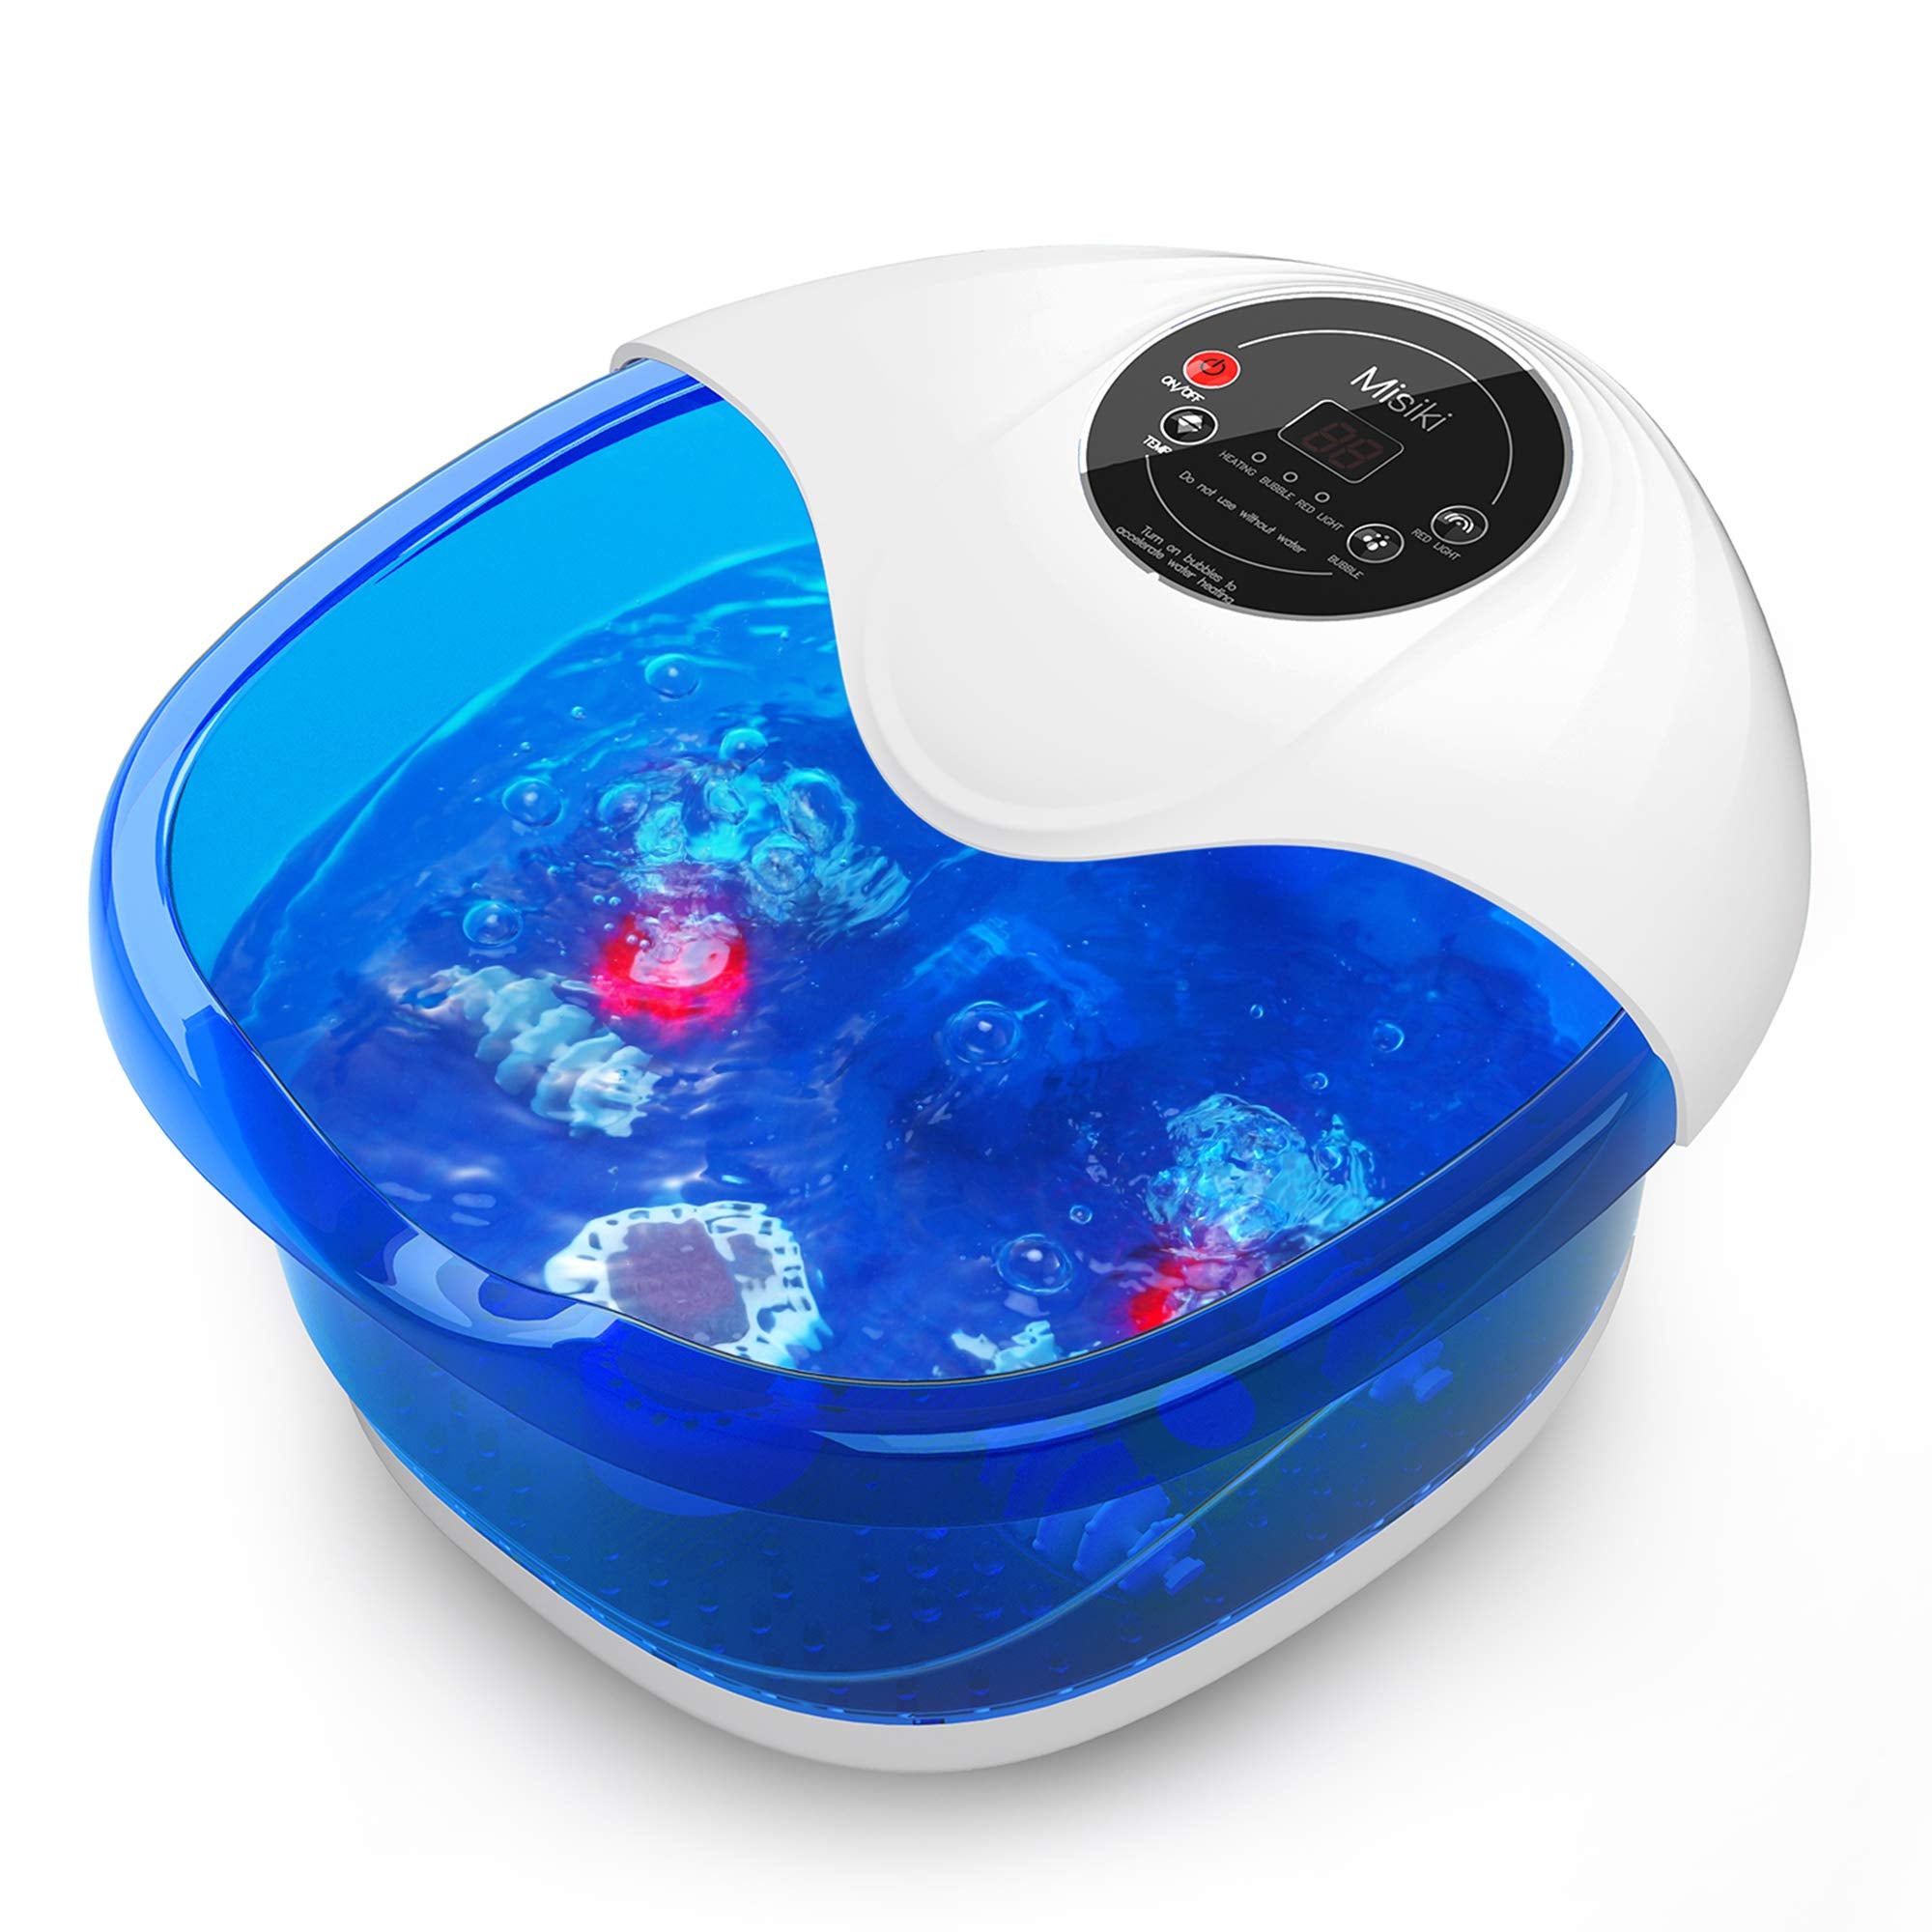 Foot Spa Misiki Foot Bath Massager with Heater Bubbles Vibration Temperature Control and Auto Shut-Off 4 in 1 Multifunction Pedicure Foot Spa for Home Use with 4 Massage Rollers to Help Relieve Stress